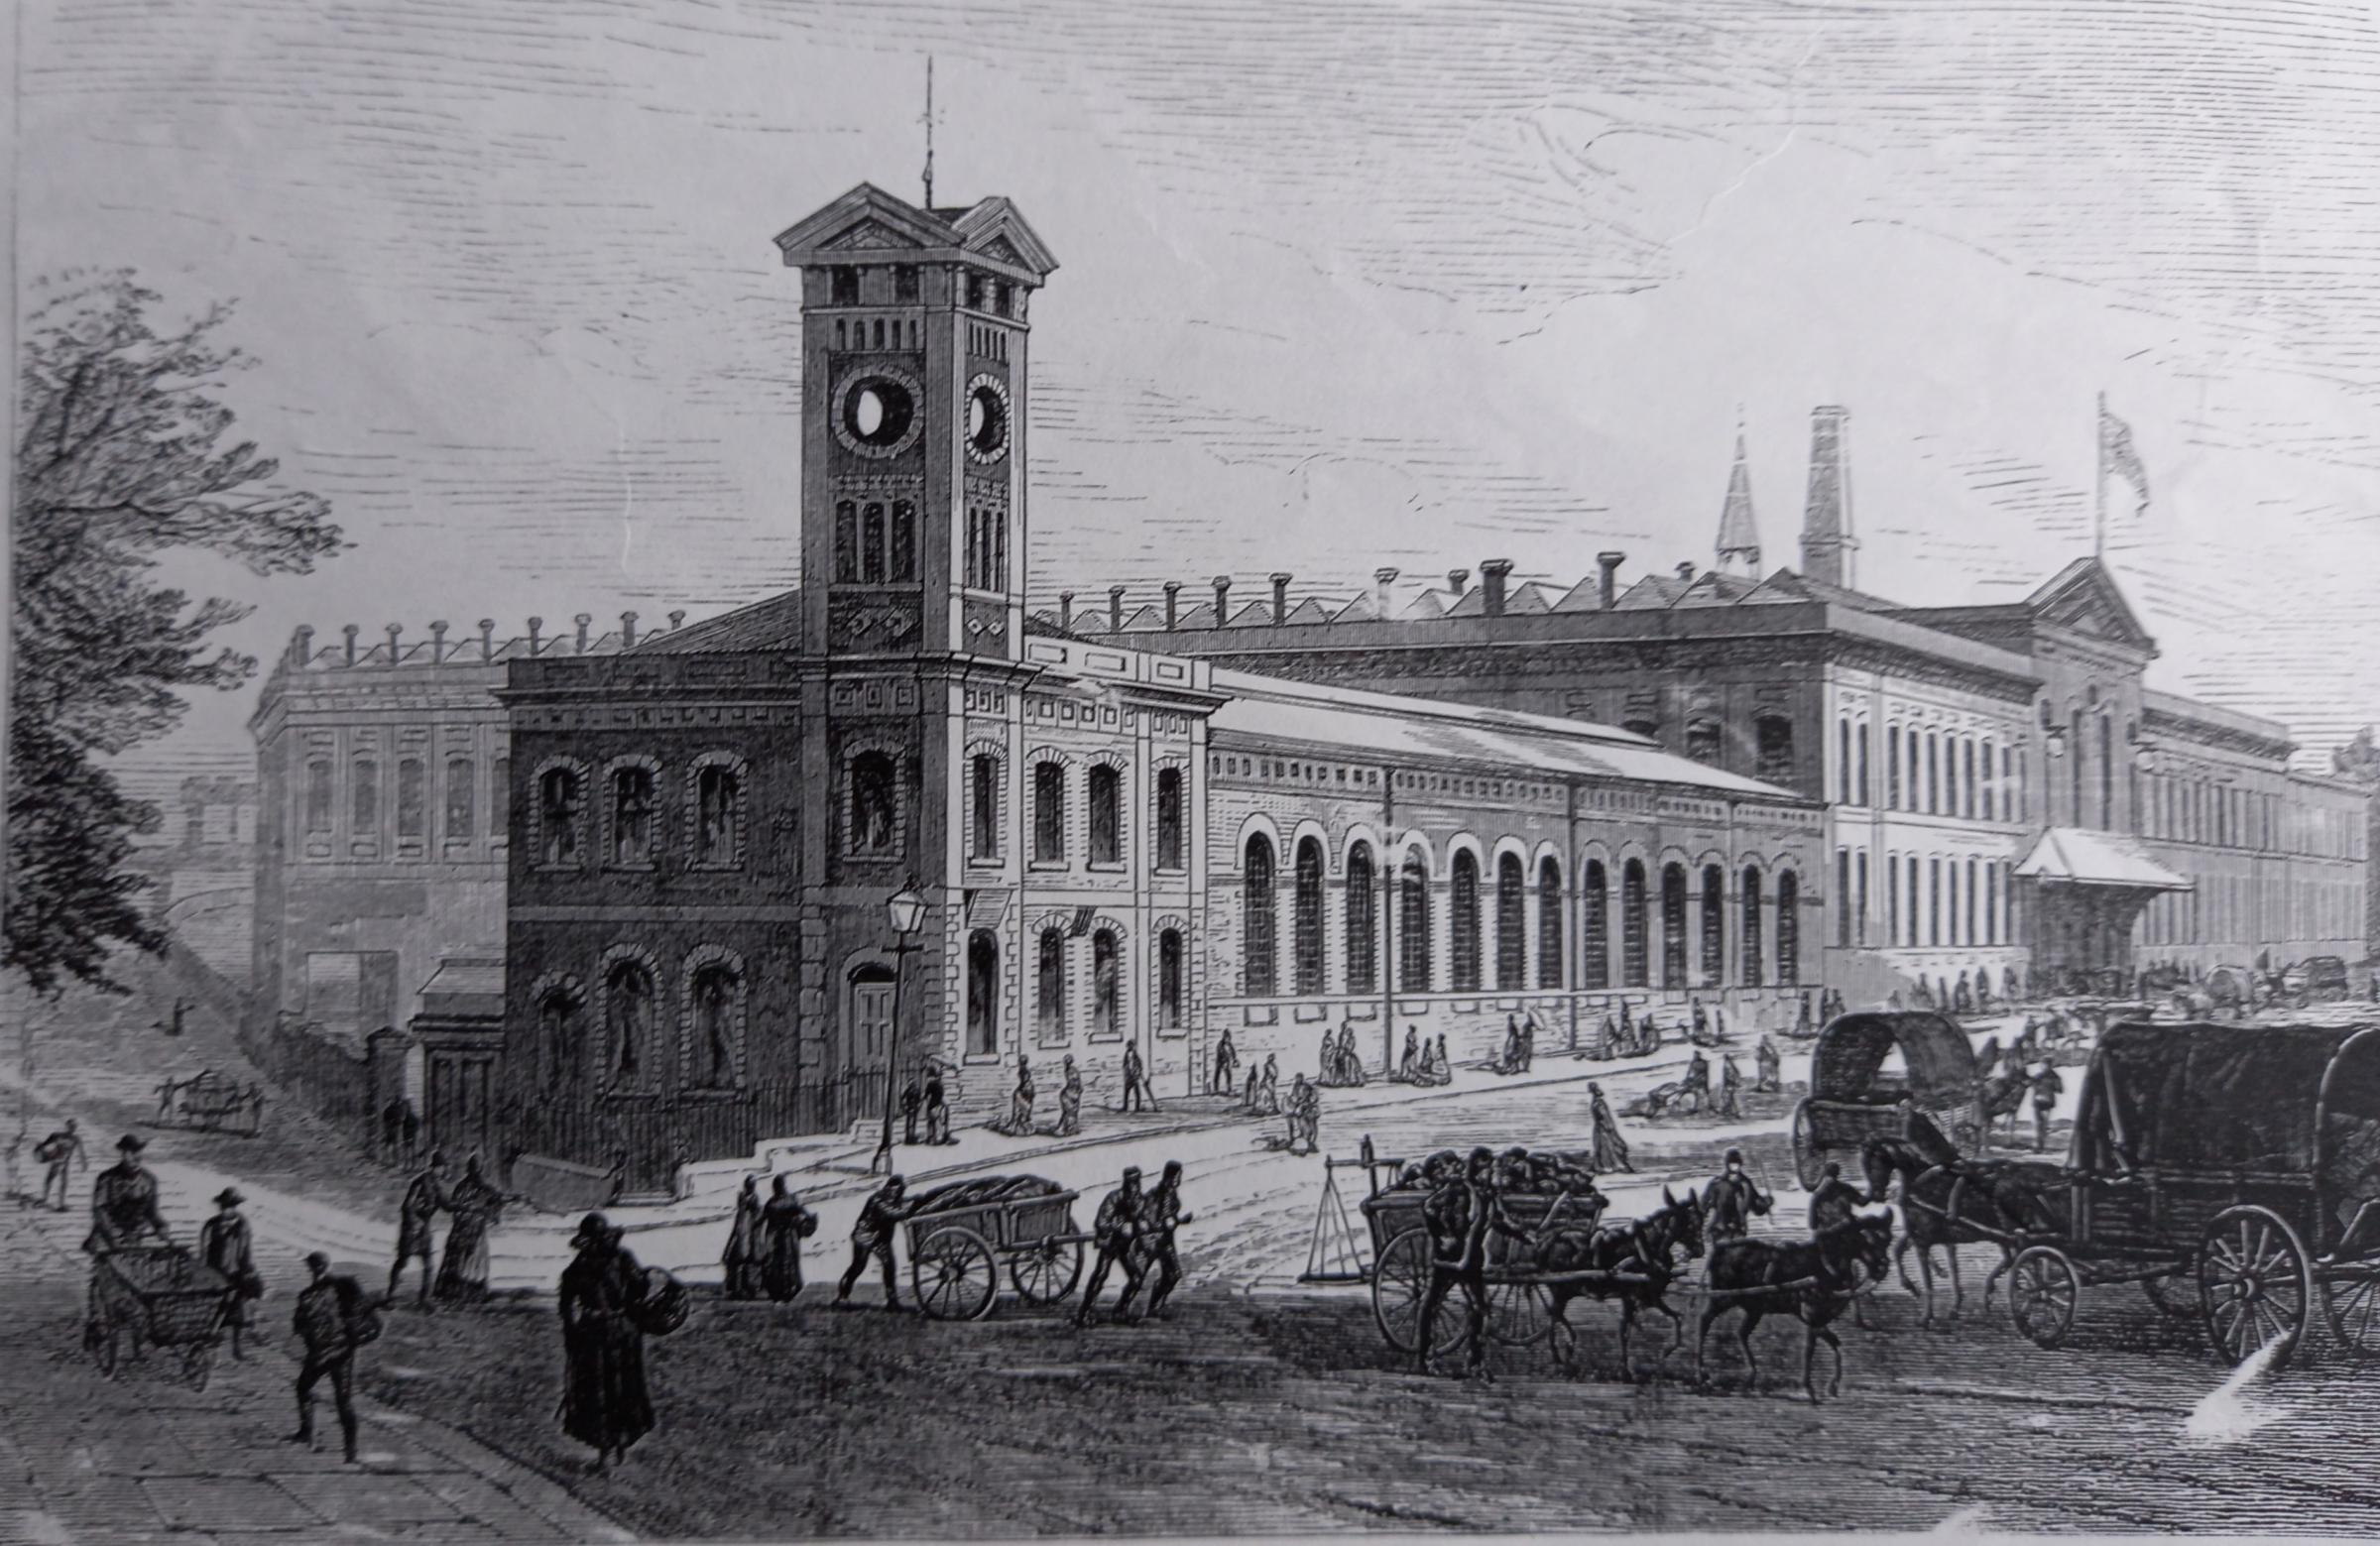 A print in the Illustrated London News of July 29, 1882 to go with a story about “an exhibition of arts and industry at Worcester Exhibition Building on Shrub-Hill”